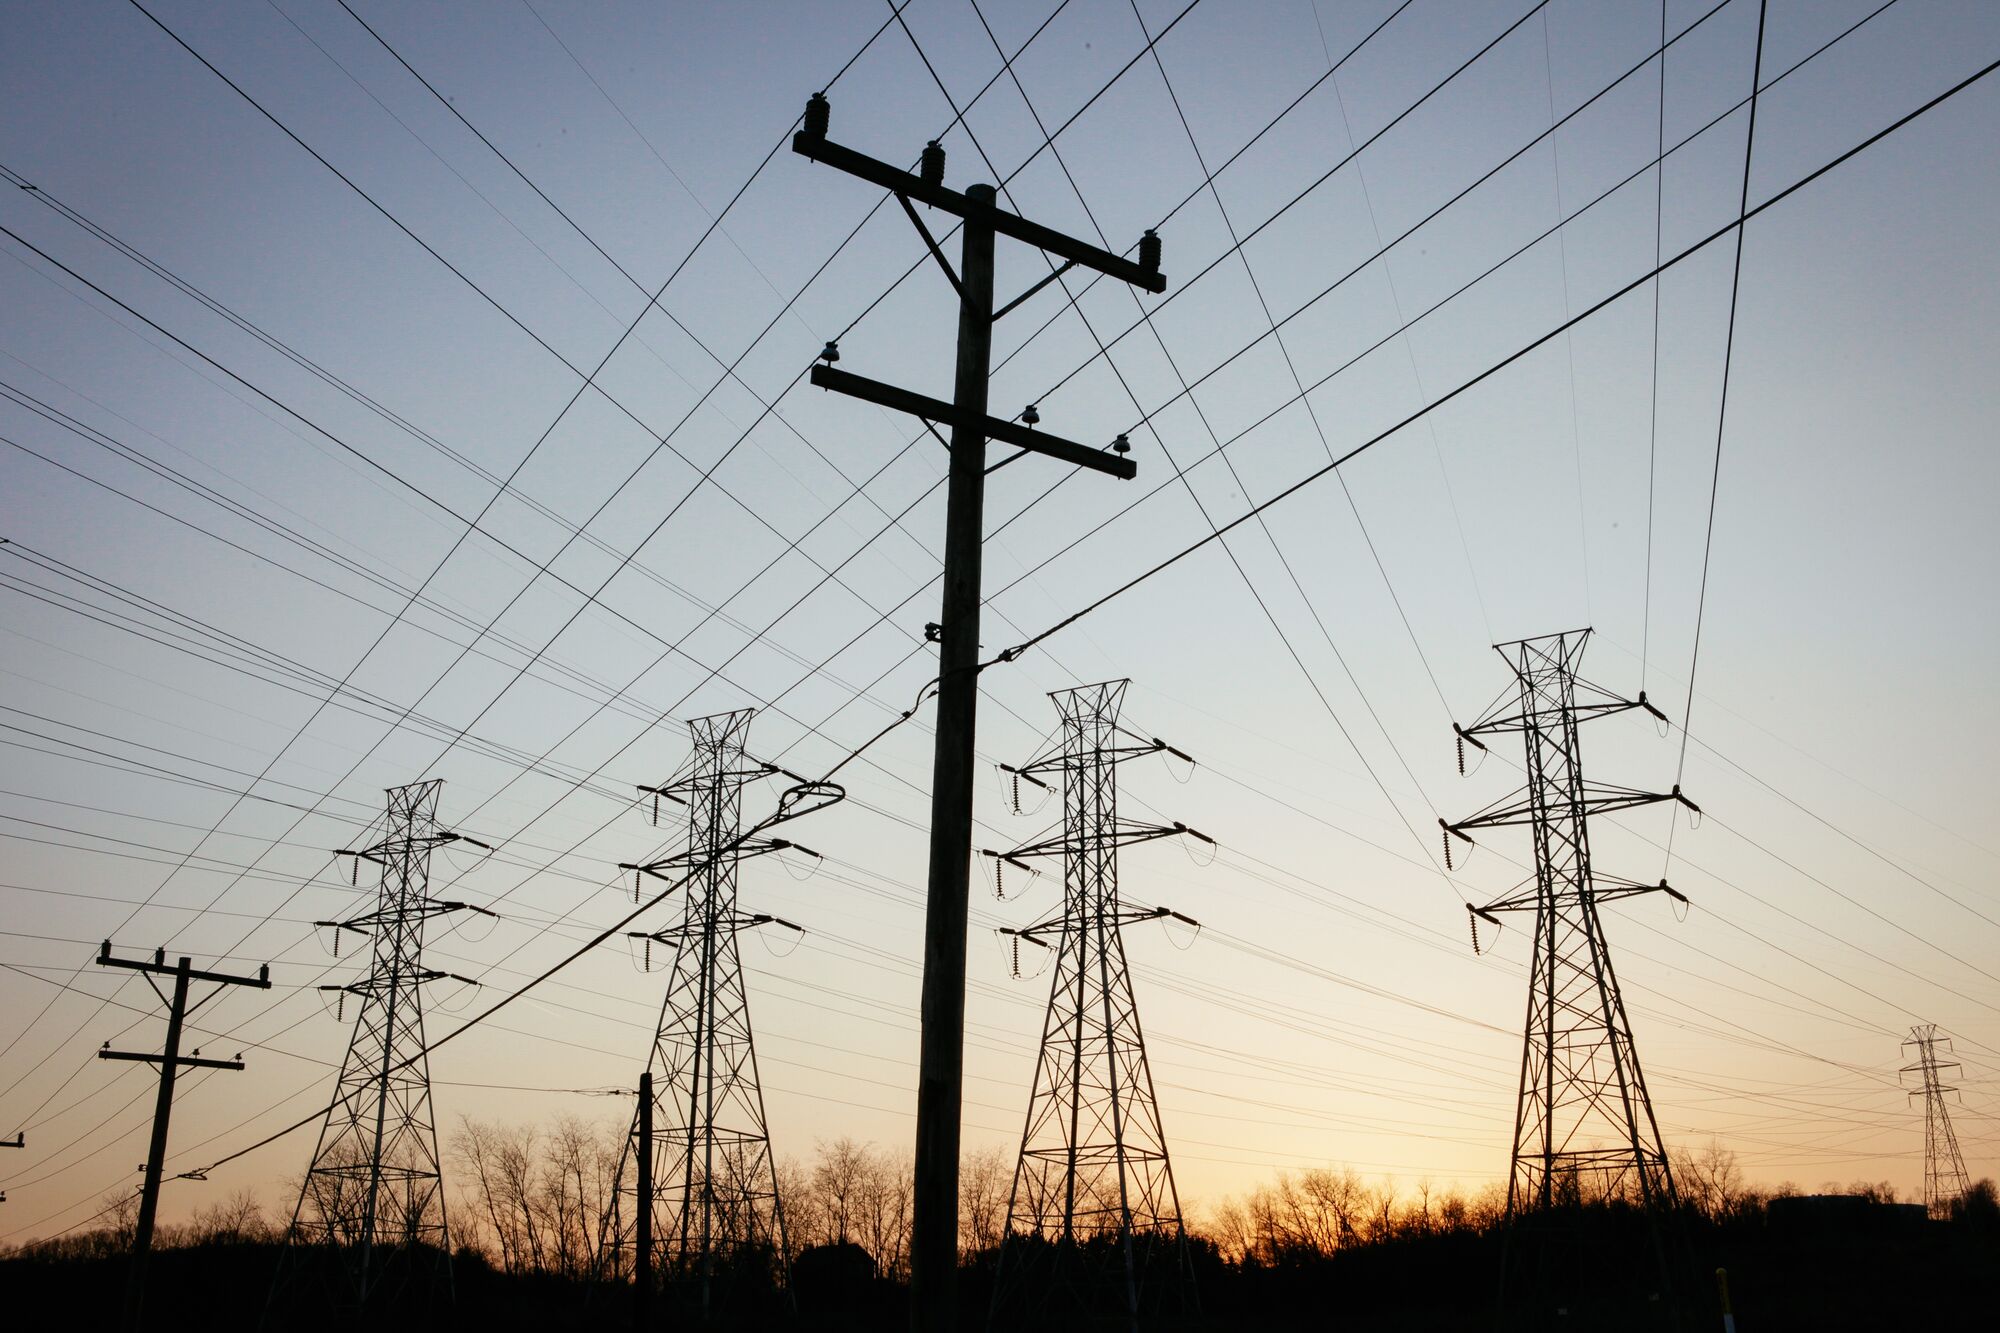 Transmission lines and utility poles are silhouetted at sunset against a darkening sky.